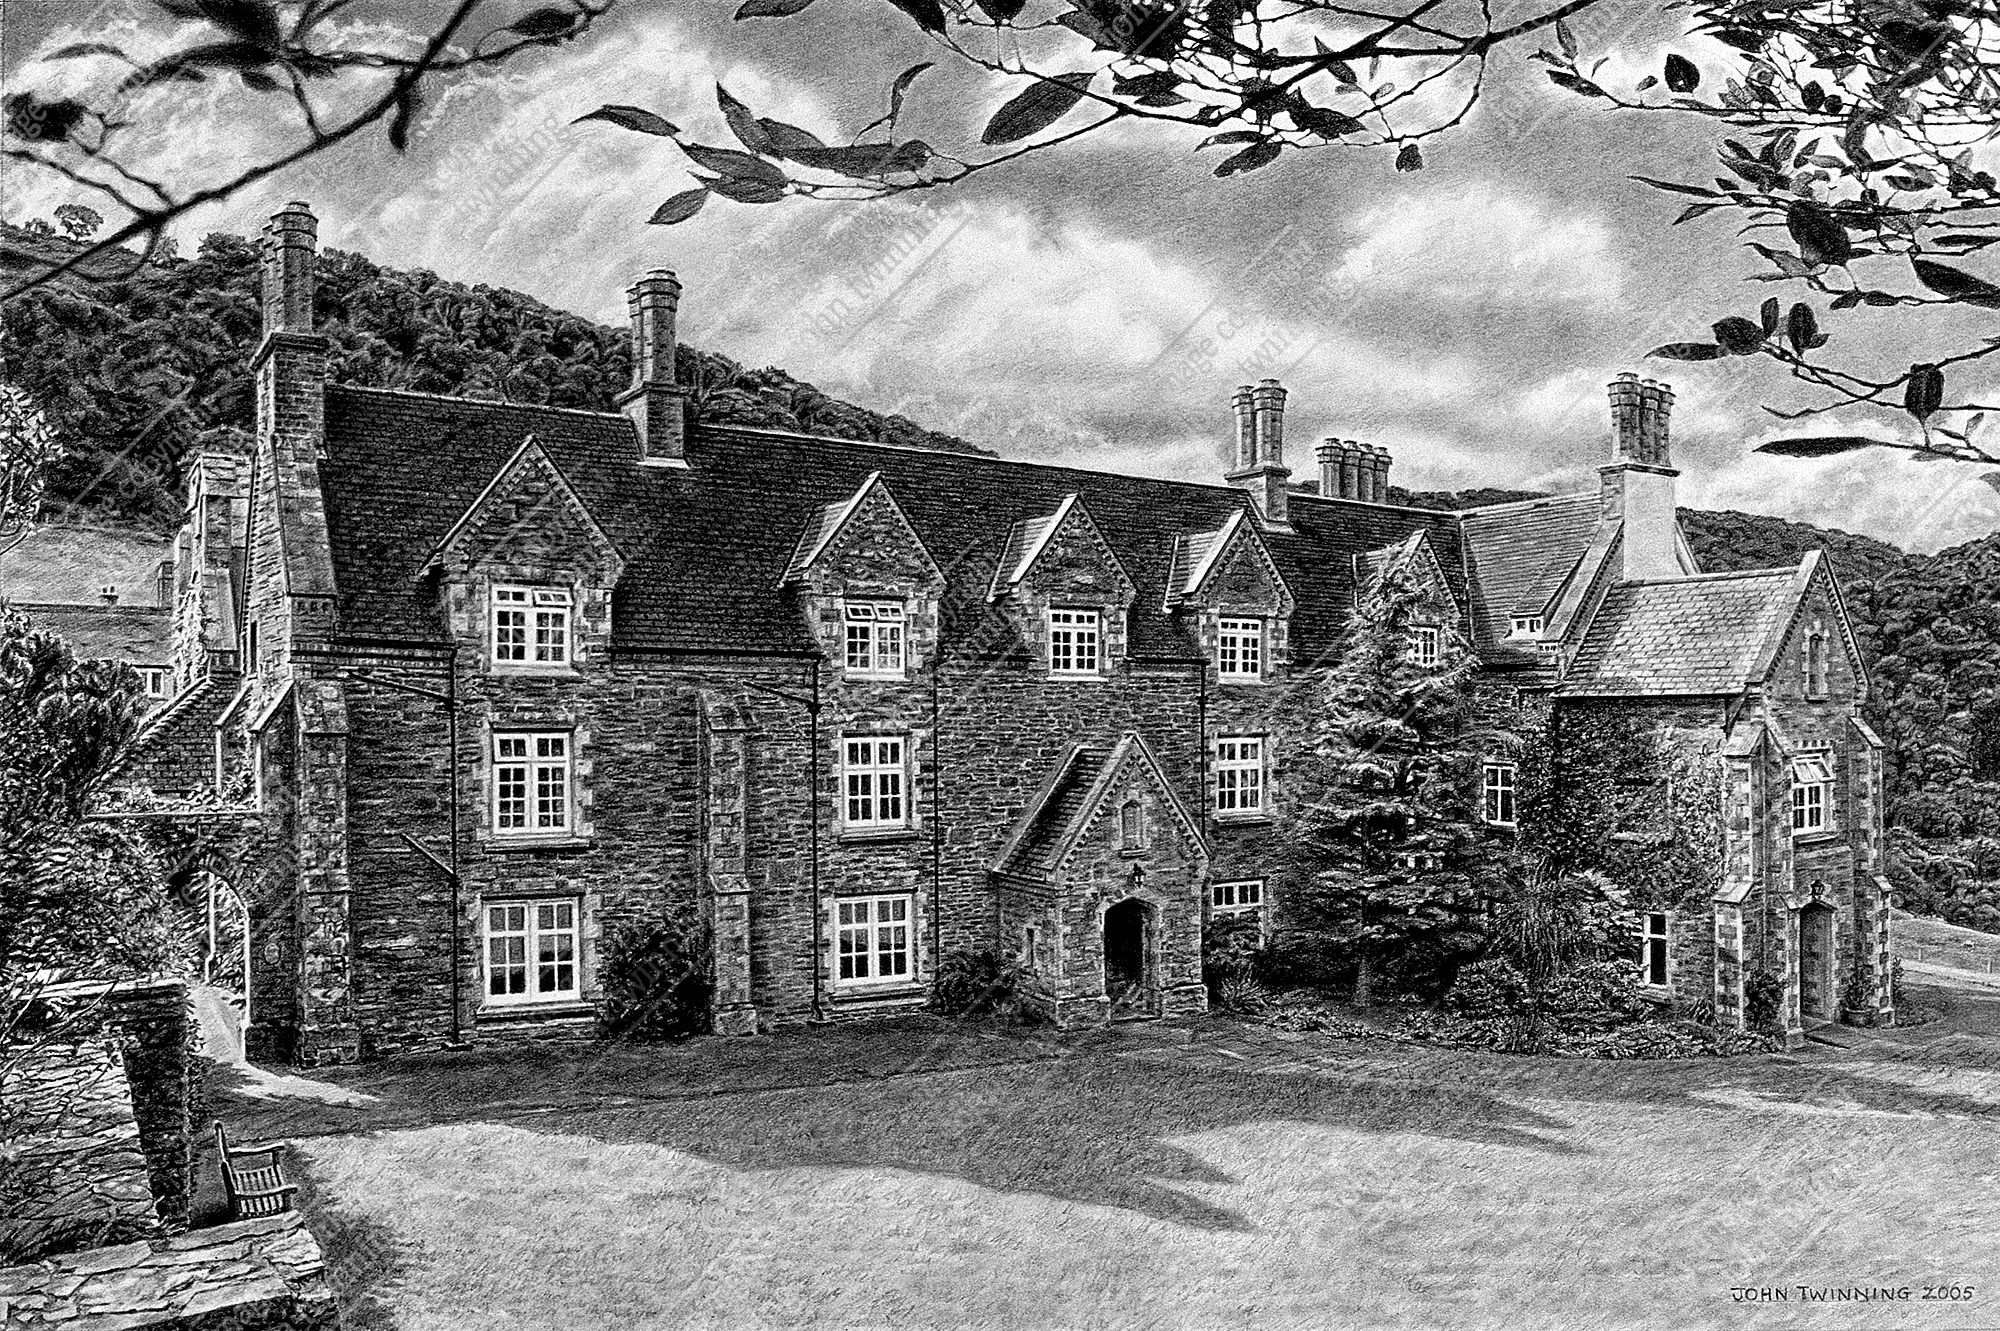 ‘Lee Abbey house from the north lawn’  – art print from a pencil drawing of this north devon based christian retreat centre